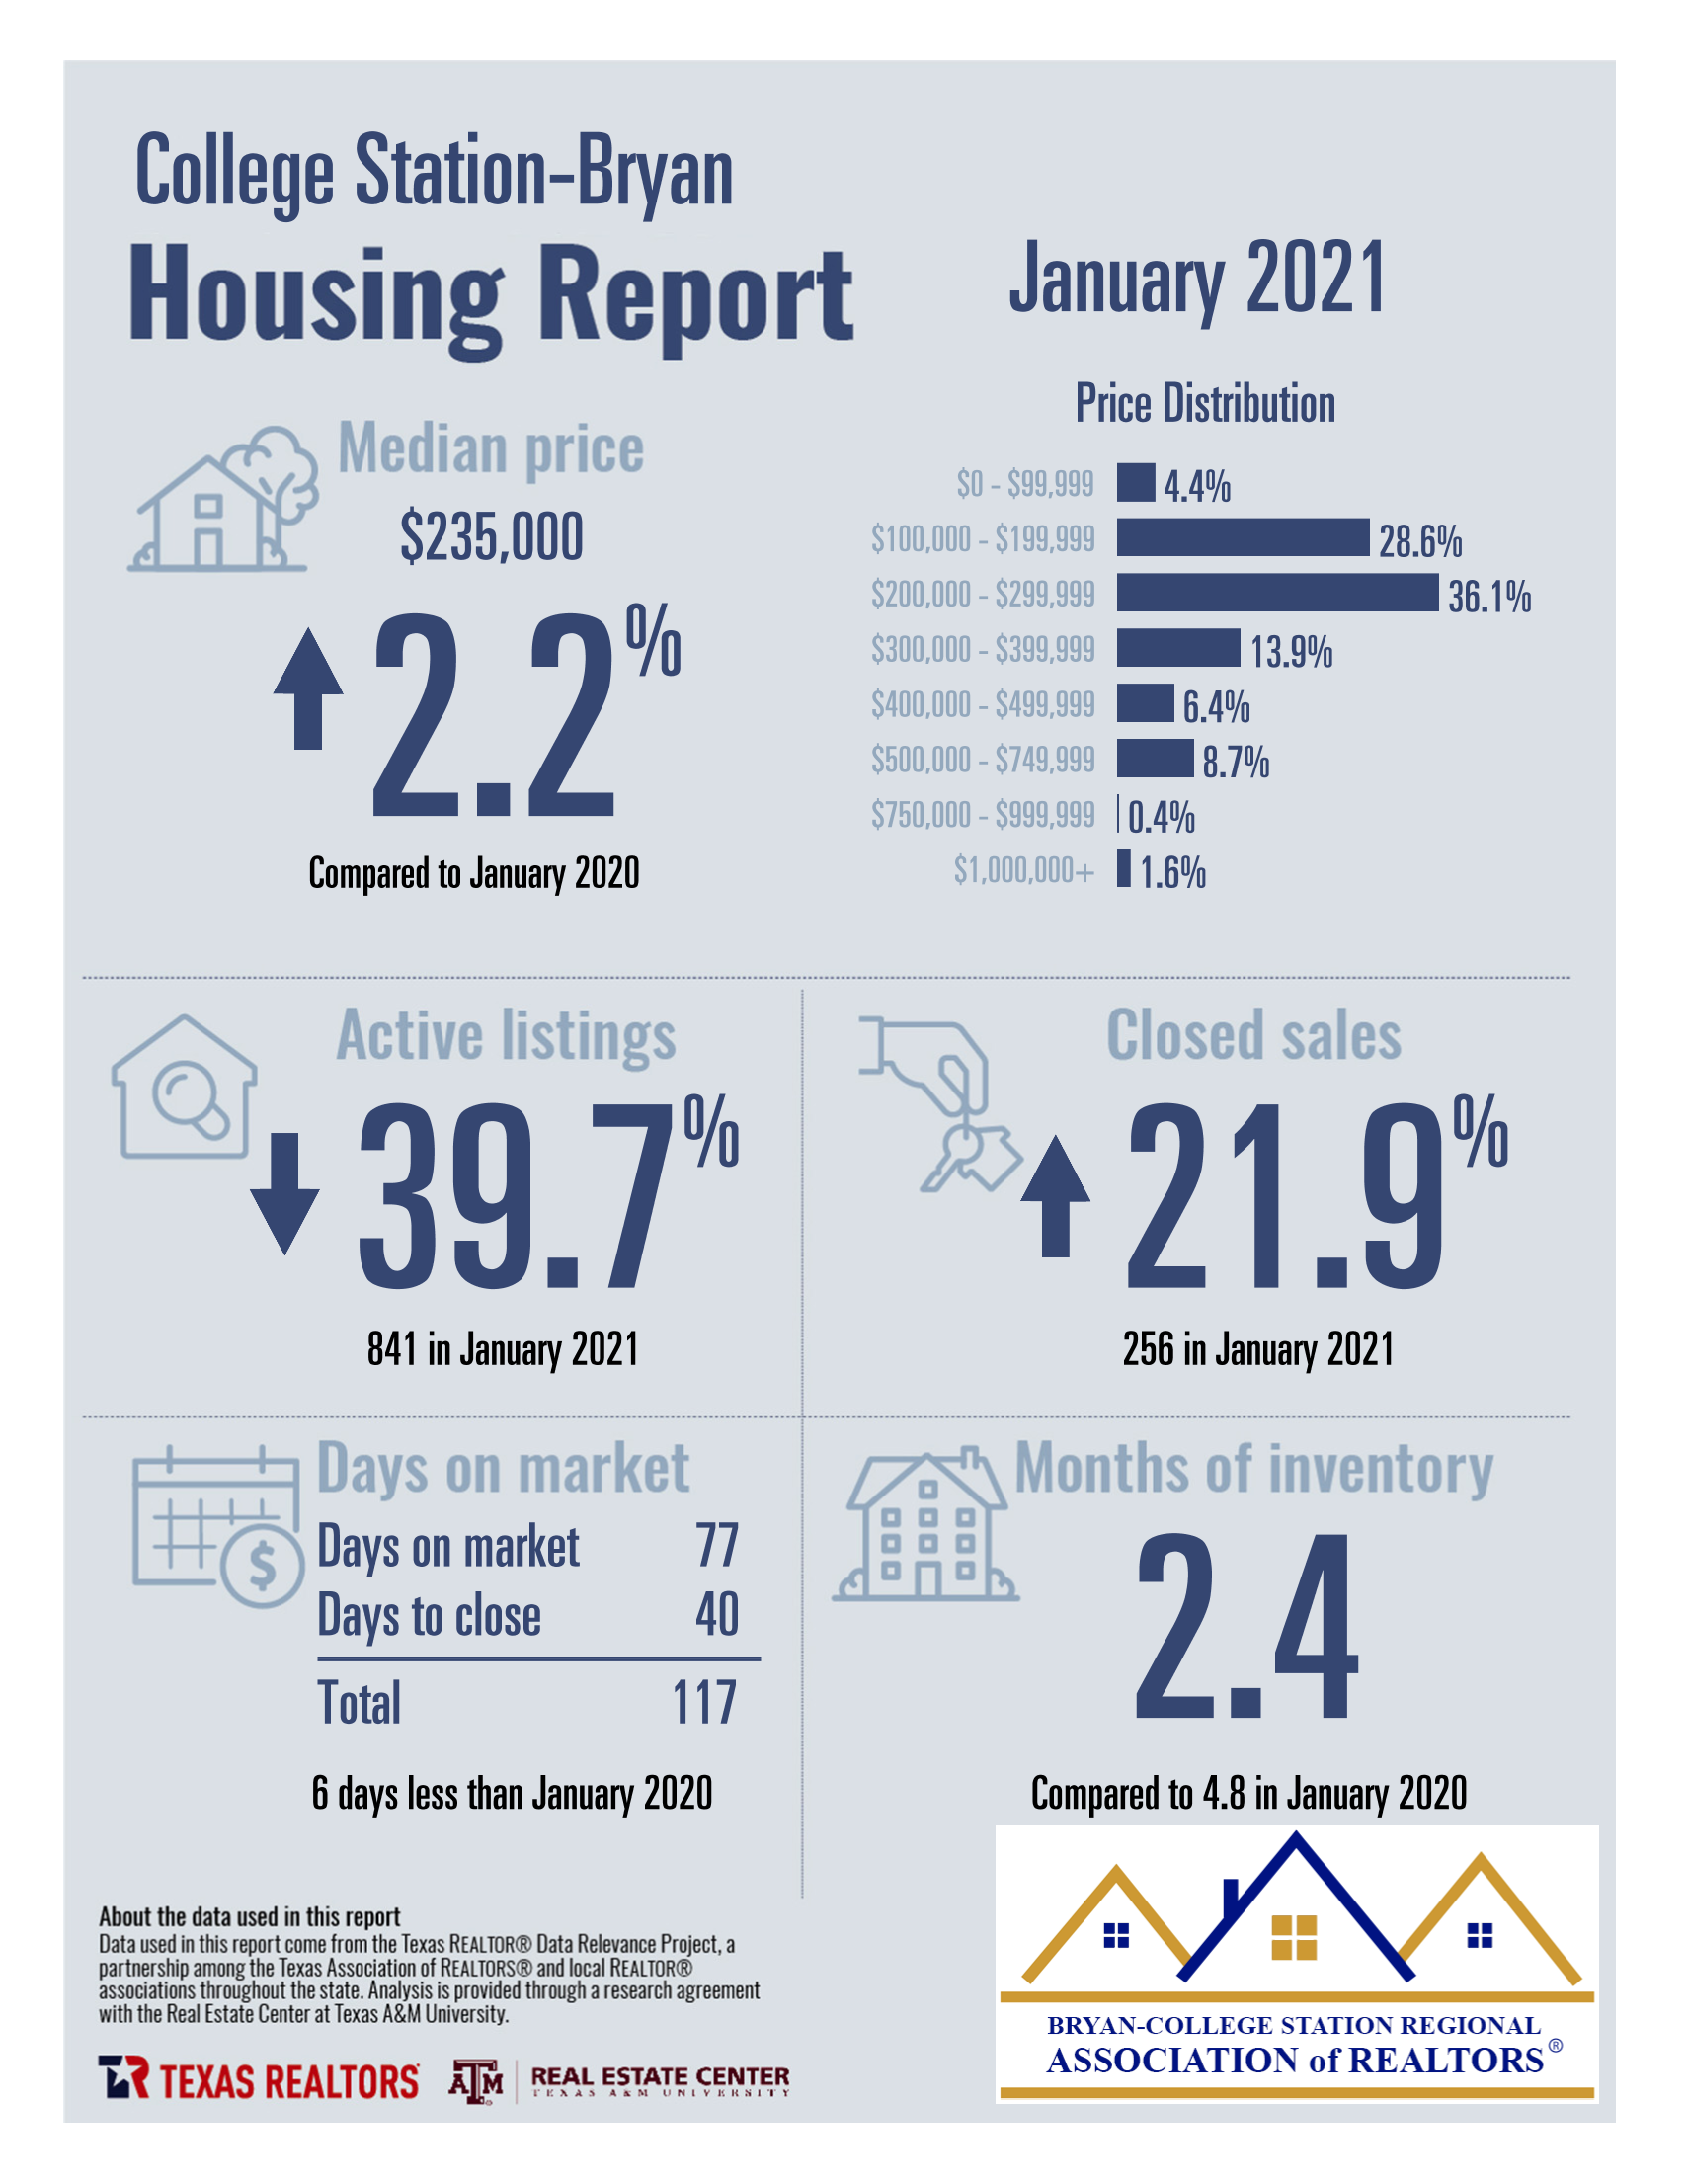 College Station-Bryan Housing Market Report for January 2021 - Judy Sweat